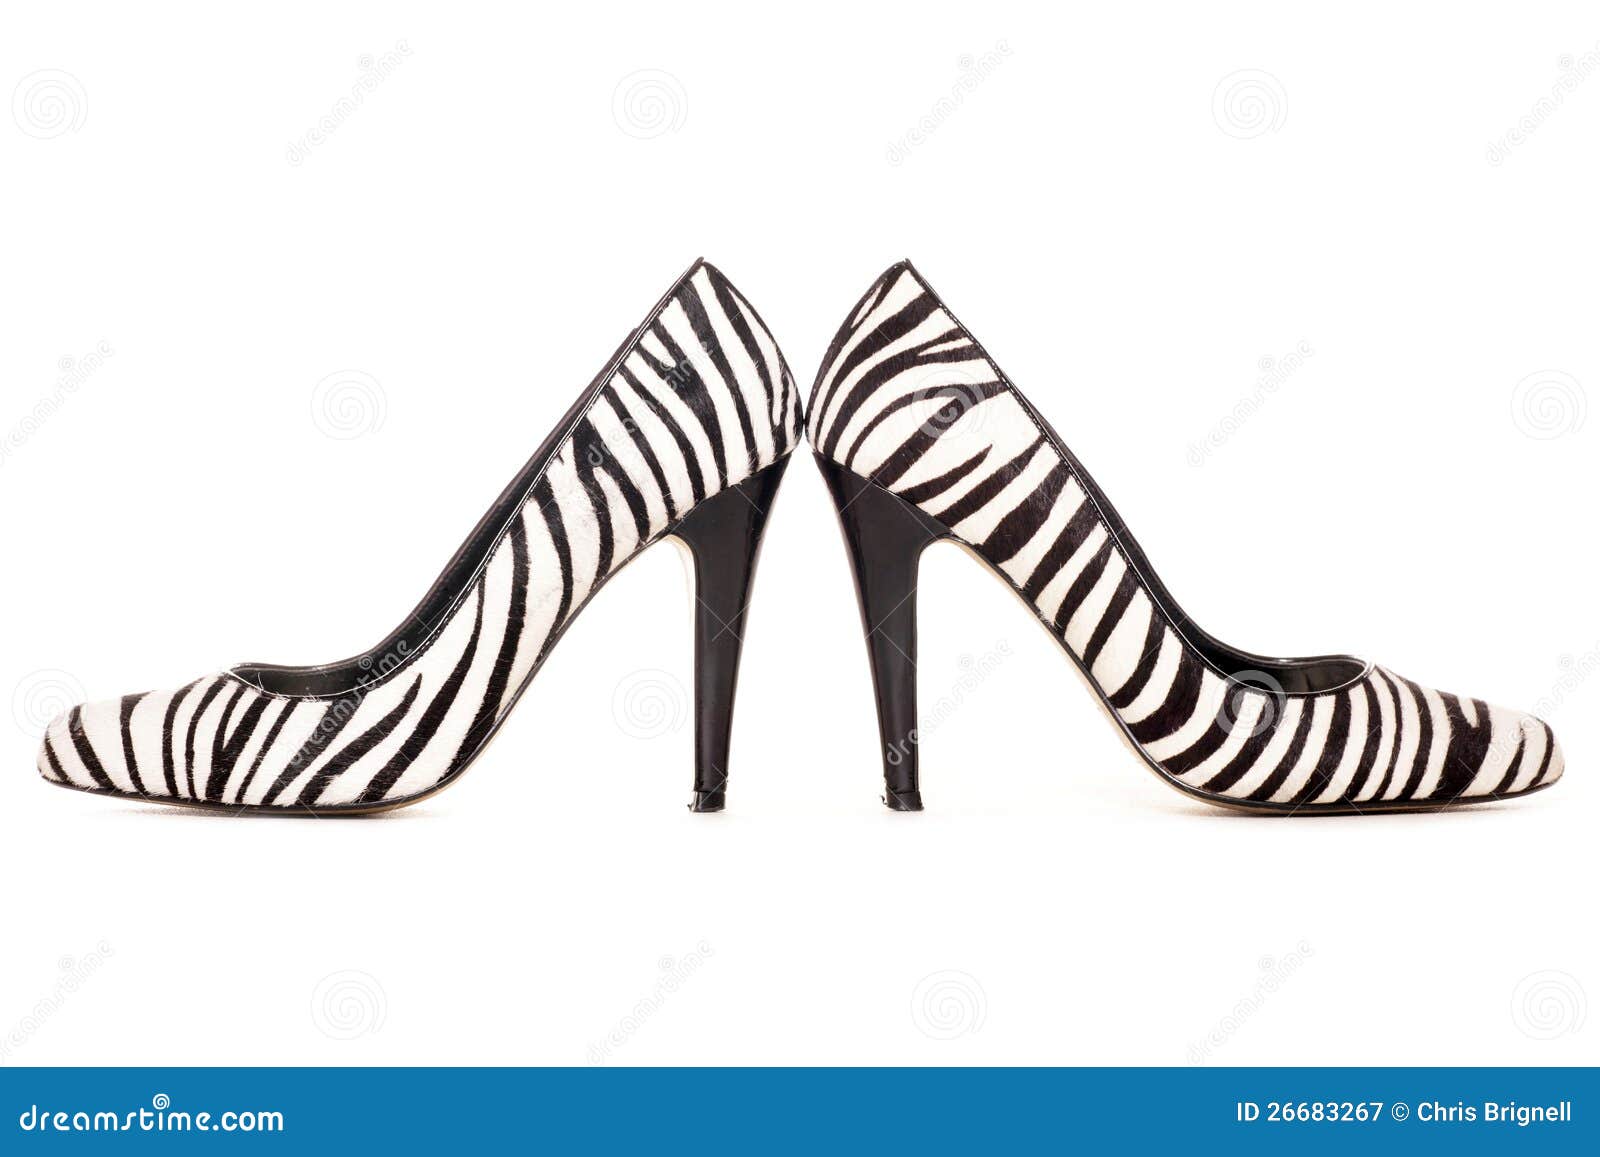 Zebra Pattern High Heel Shoes Royalty Free Stock Photography - Image ...